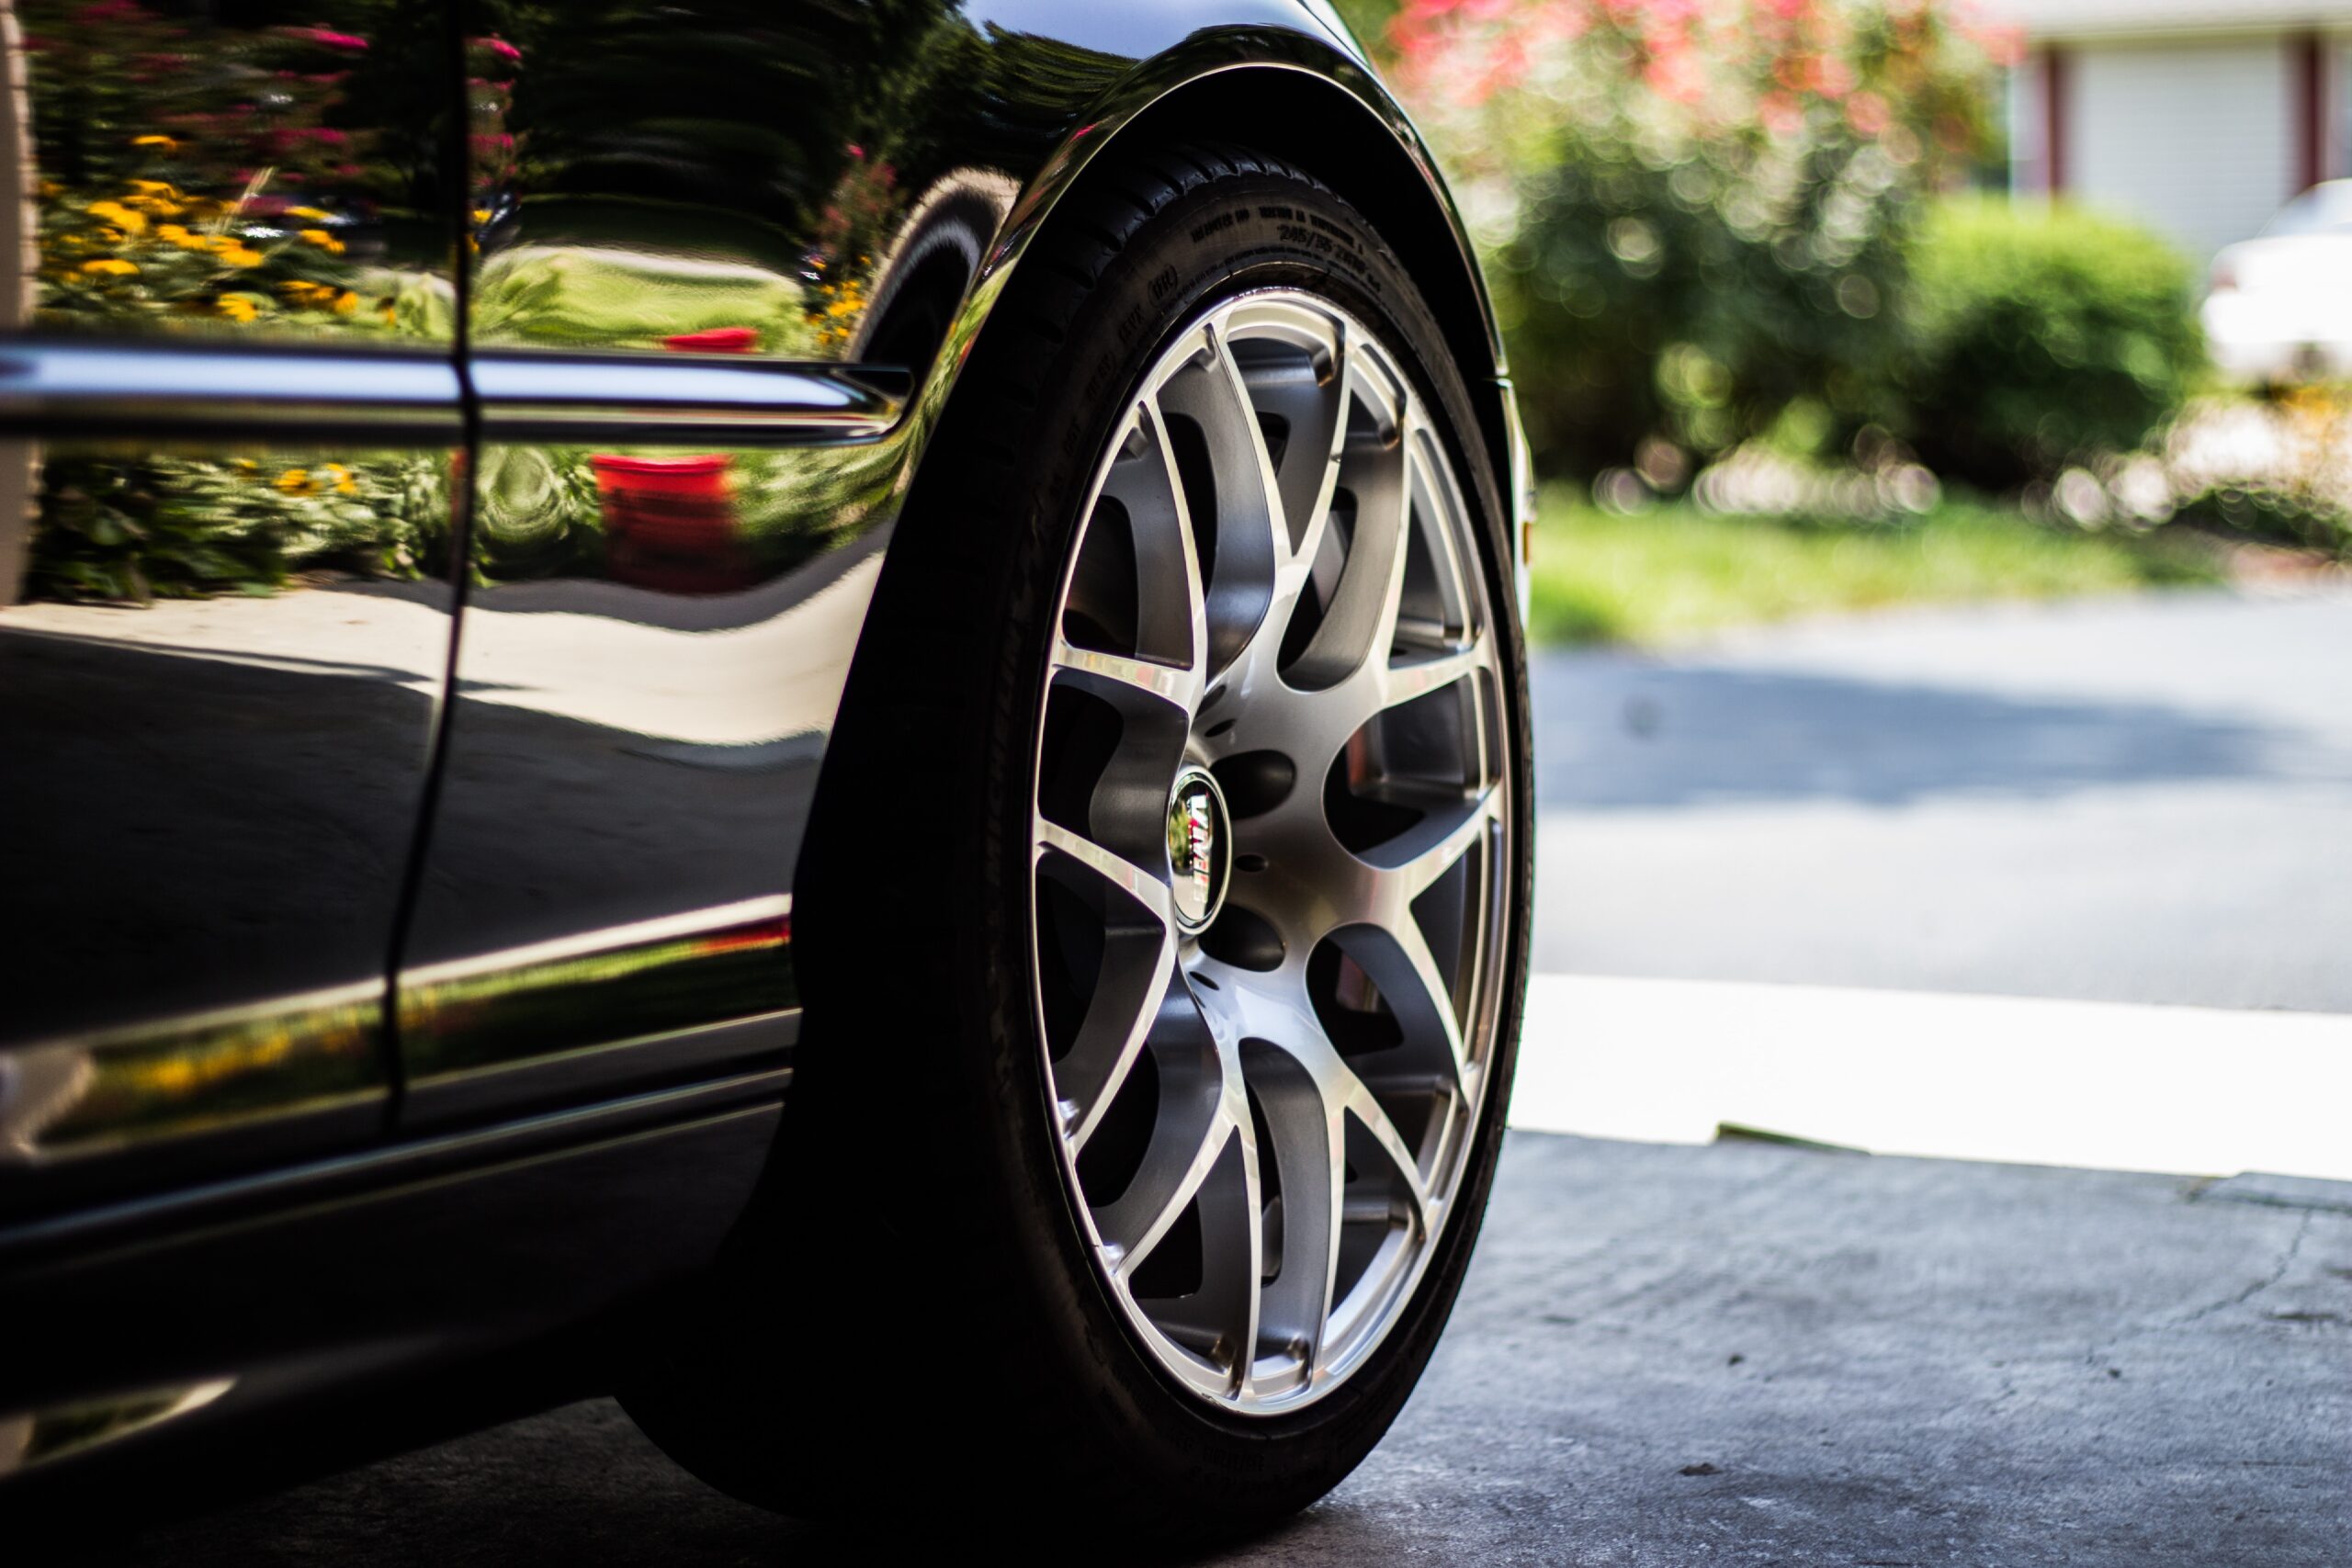 Choose the Best Tires for Your Car